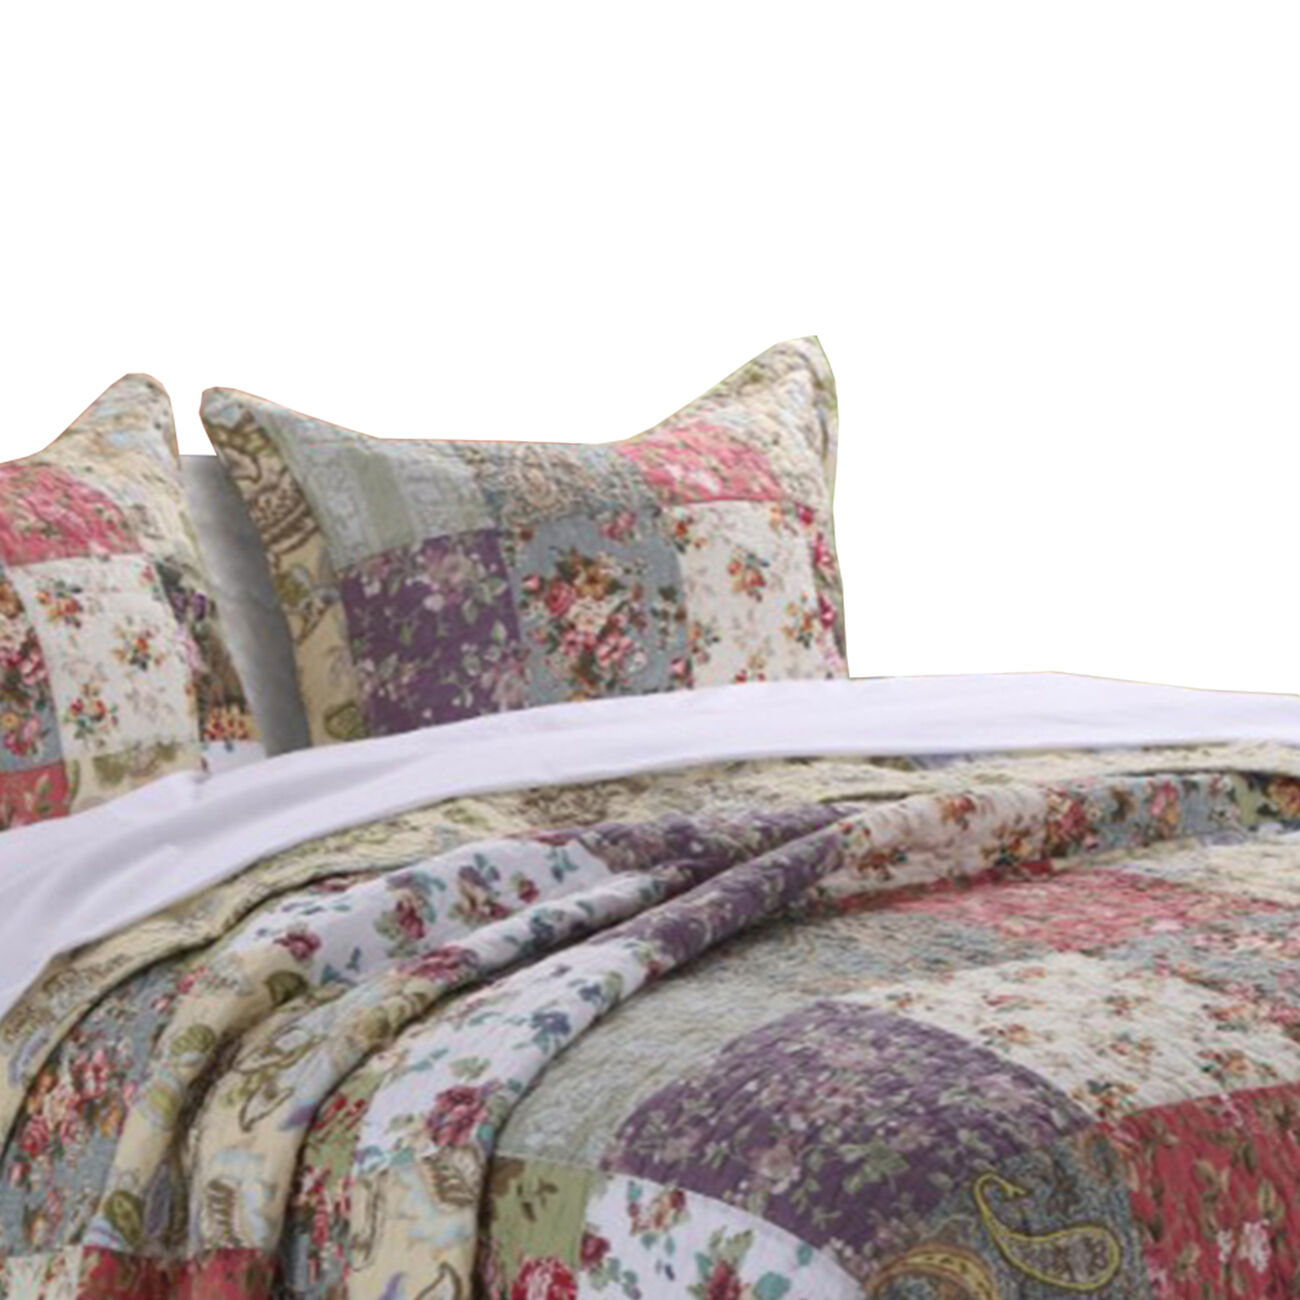 Chicago 3 Piece Fabric King Bedspread Set with Jacobean Prints, Multicolor